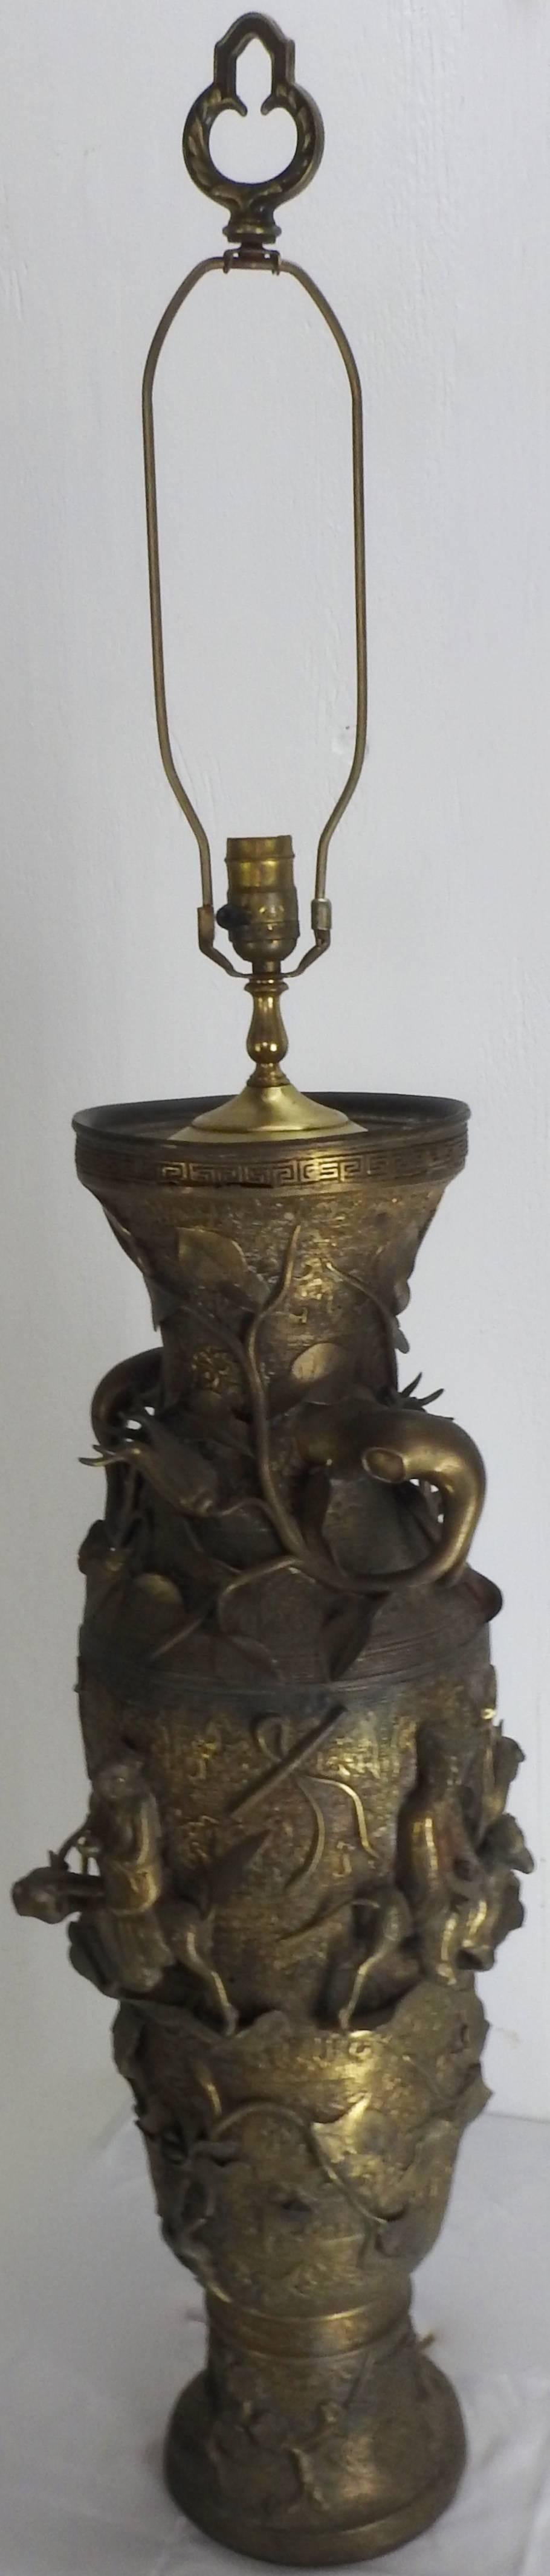 The detailed repousse metalwork on this magnificent bronze lamp featuring water buffalo with riders is outstanding! The intricate design is highlighted with flowers and vines twining through the design. It includes the harp to mount your shade and